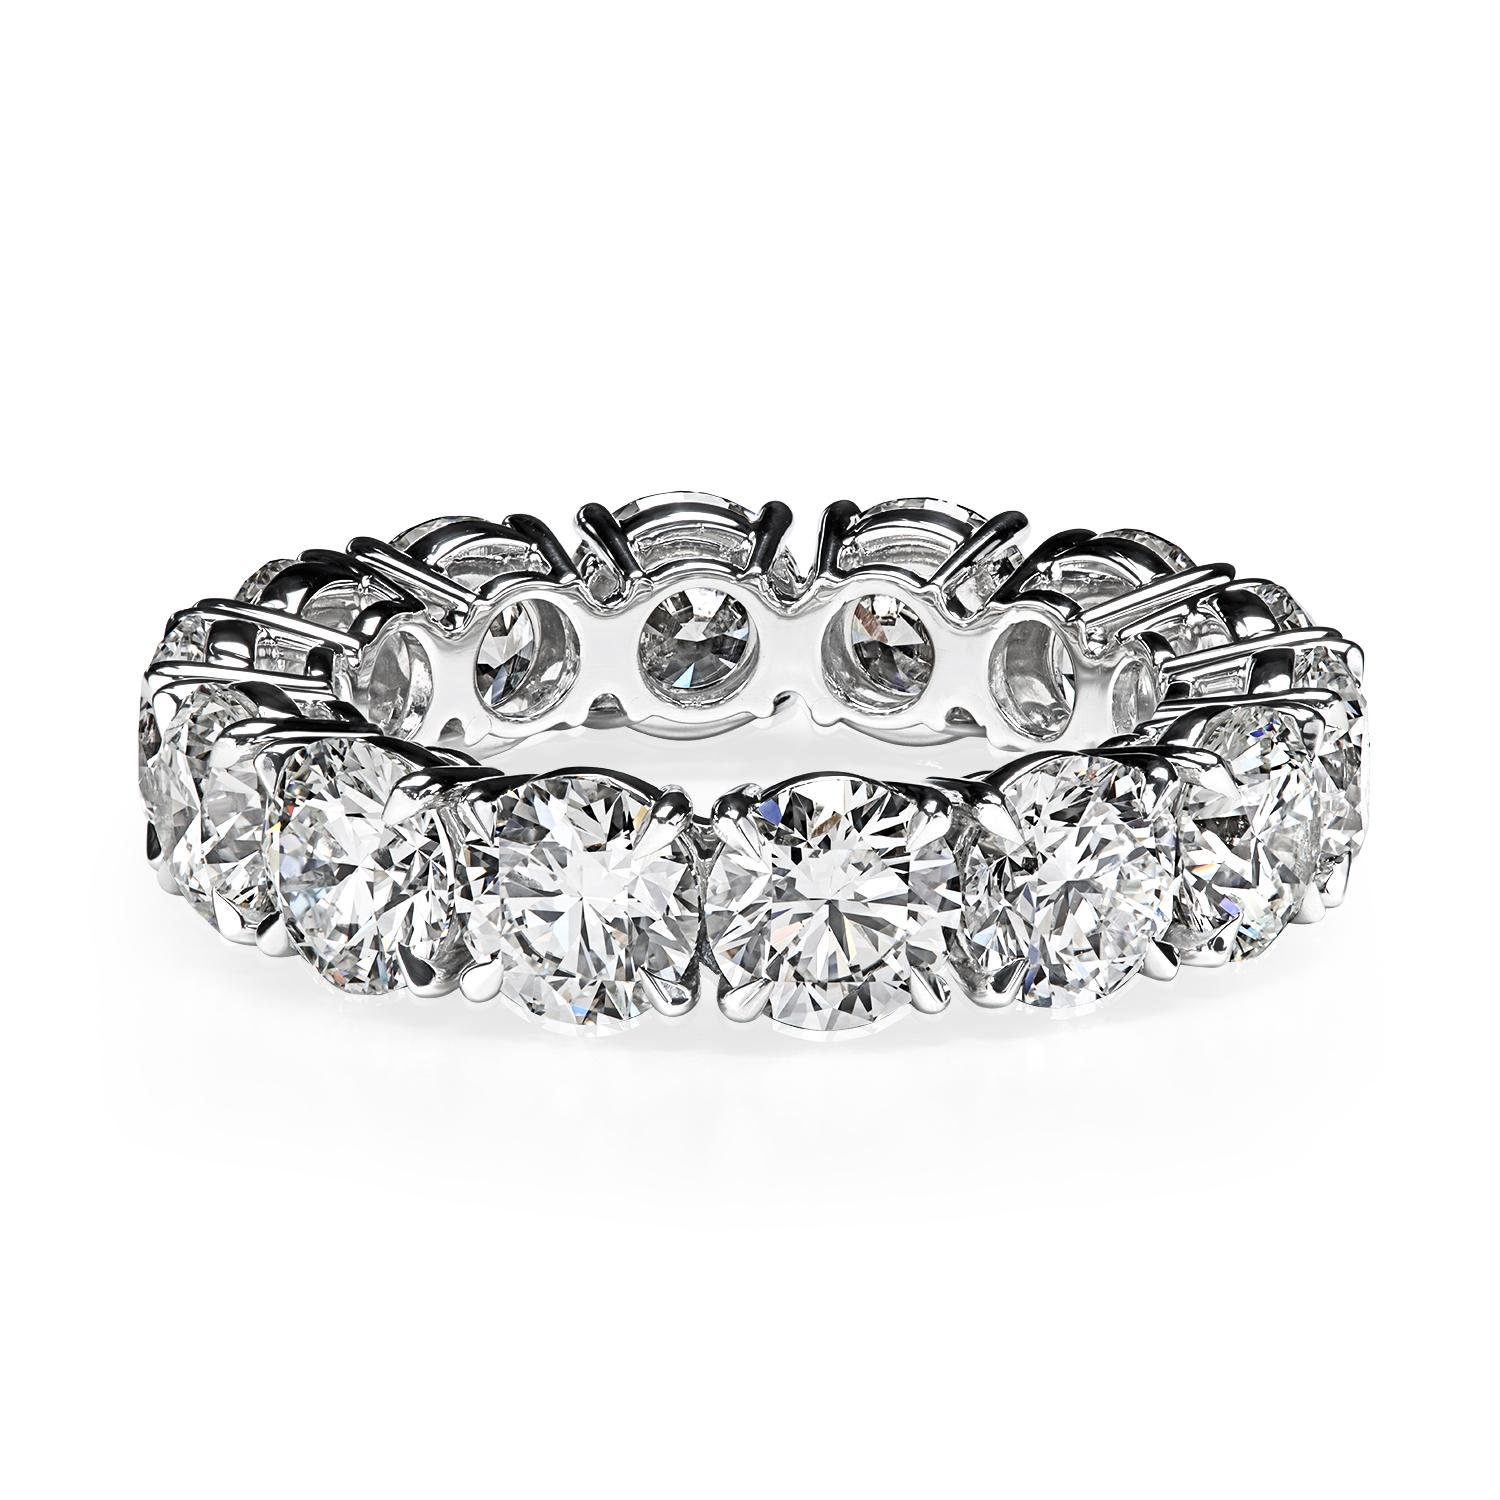 Handmade eternity band with round diamonds by the famed New York jeweler and Avant Garde artist Leon Mege.
The 4-prong style eternity bands are popularized by Cartier and offer extra security and upscale charm.

The eternity band will be hand-forged